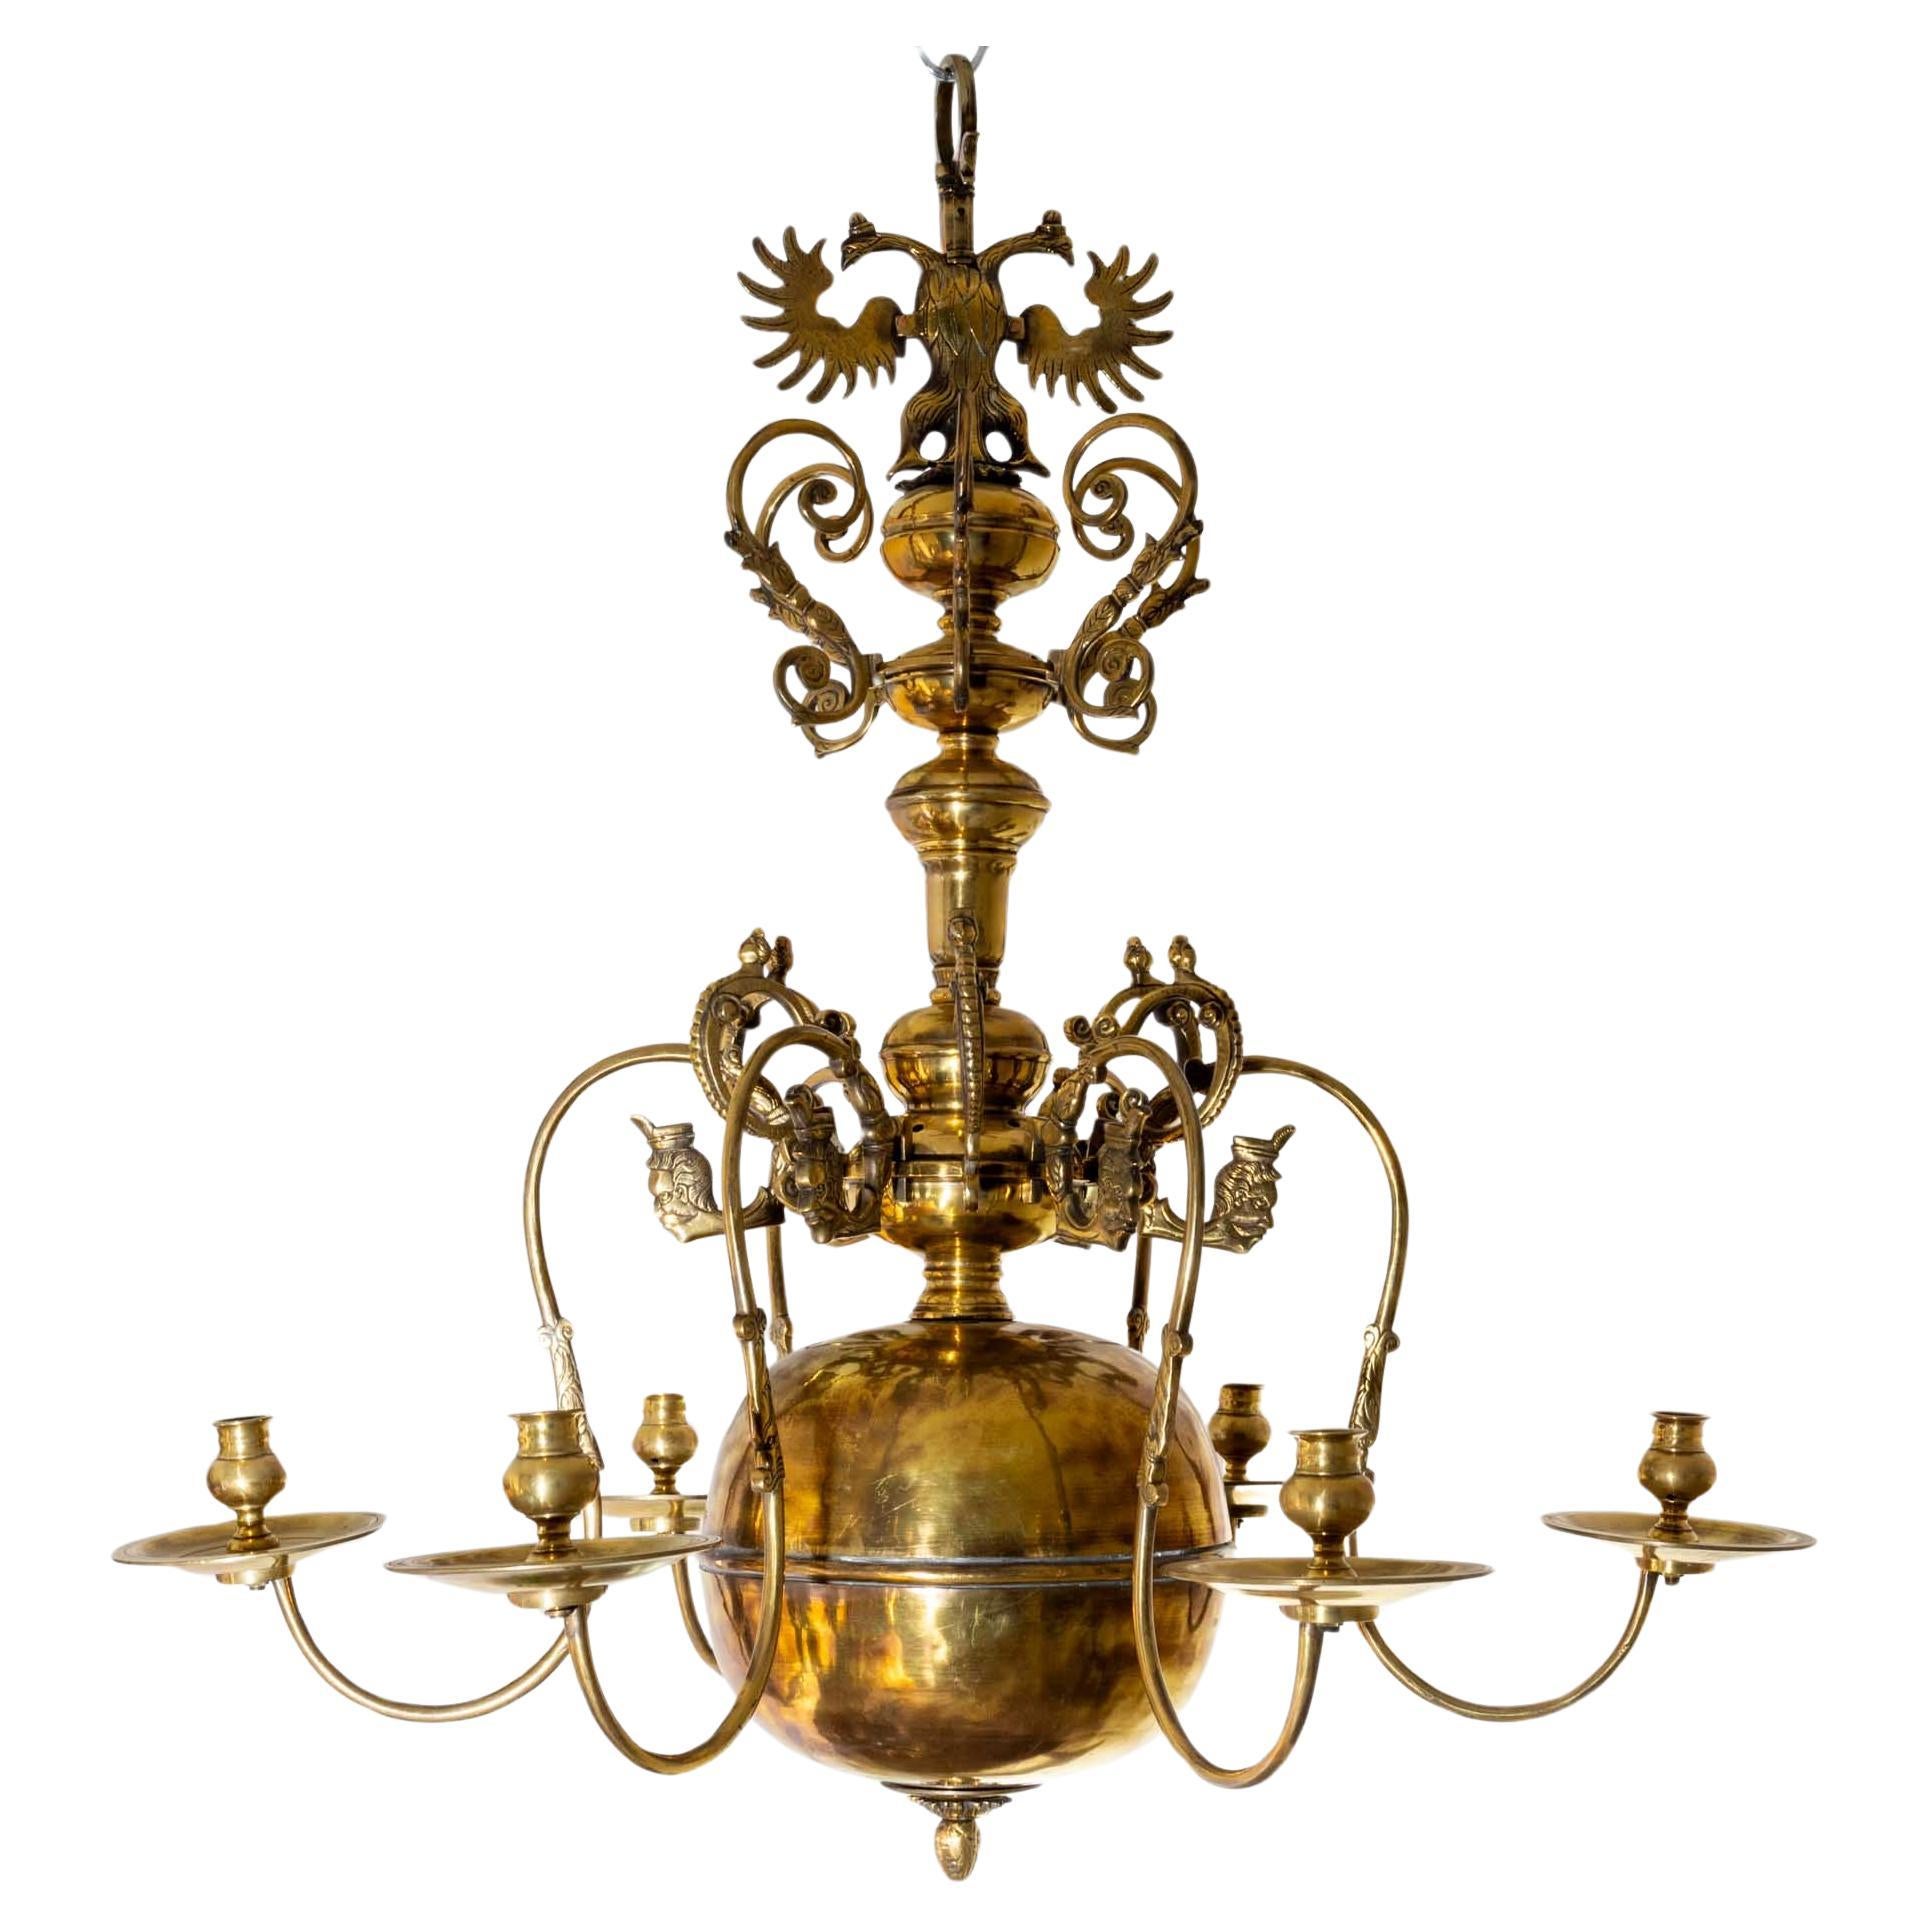 Bronze Chandelier with six arms, 19th century